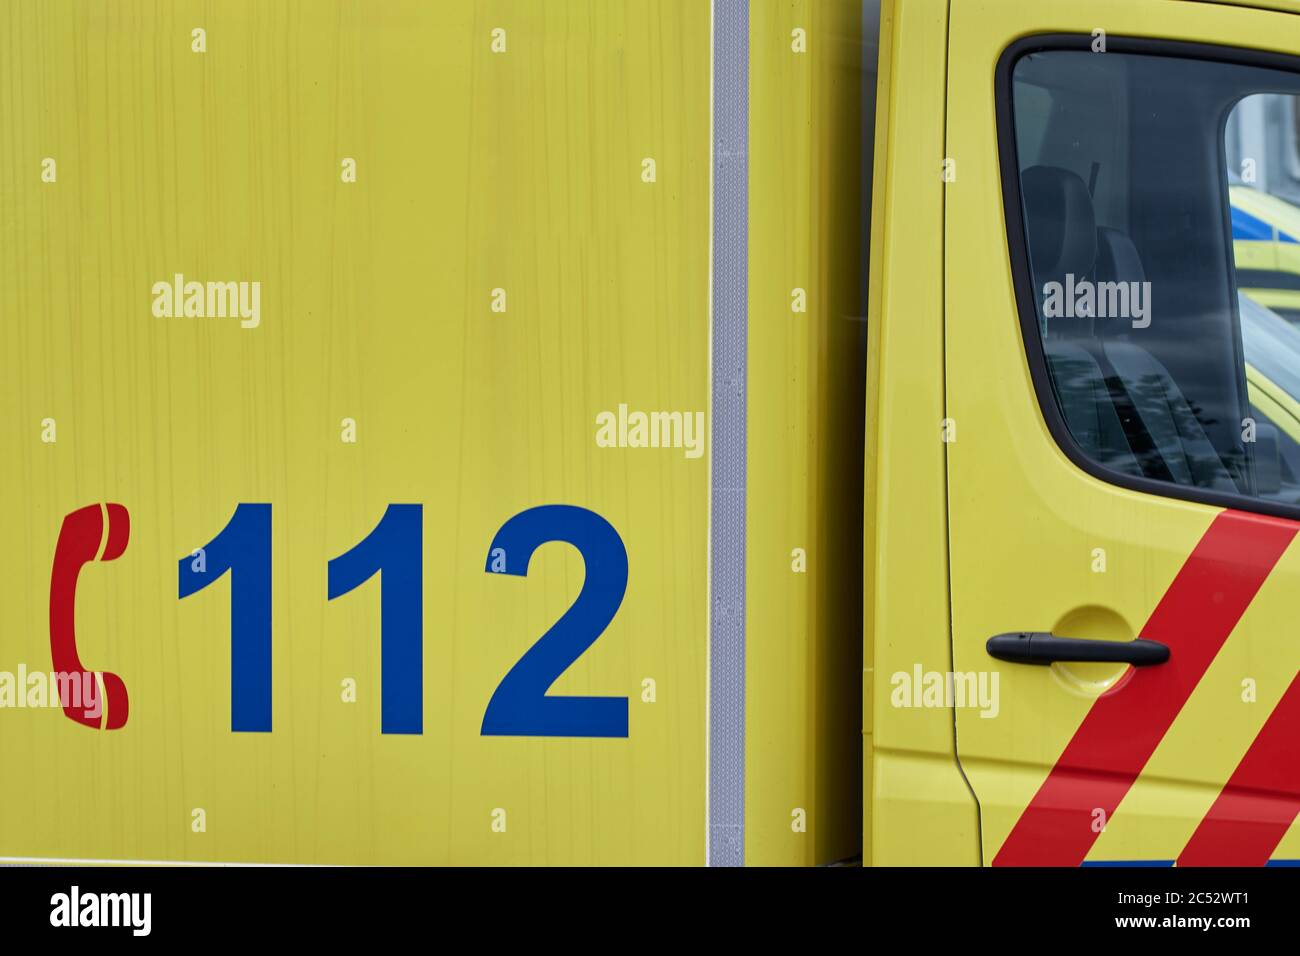 Close-up of yellow ambulance van with German emergency phone number 112 Stock Photo